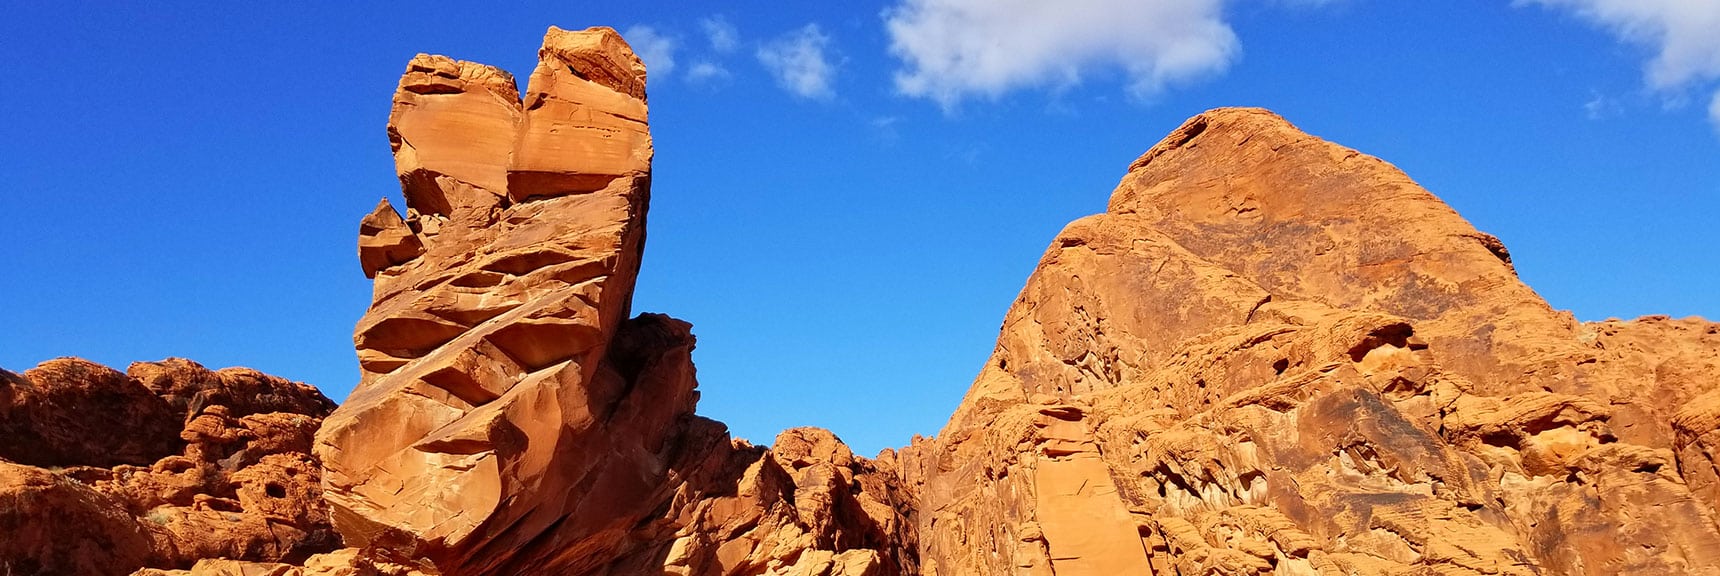 Balancing Rock Beyond Mouse's Tank Trail in Valley of Fire State Park, Nevada